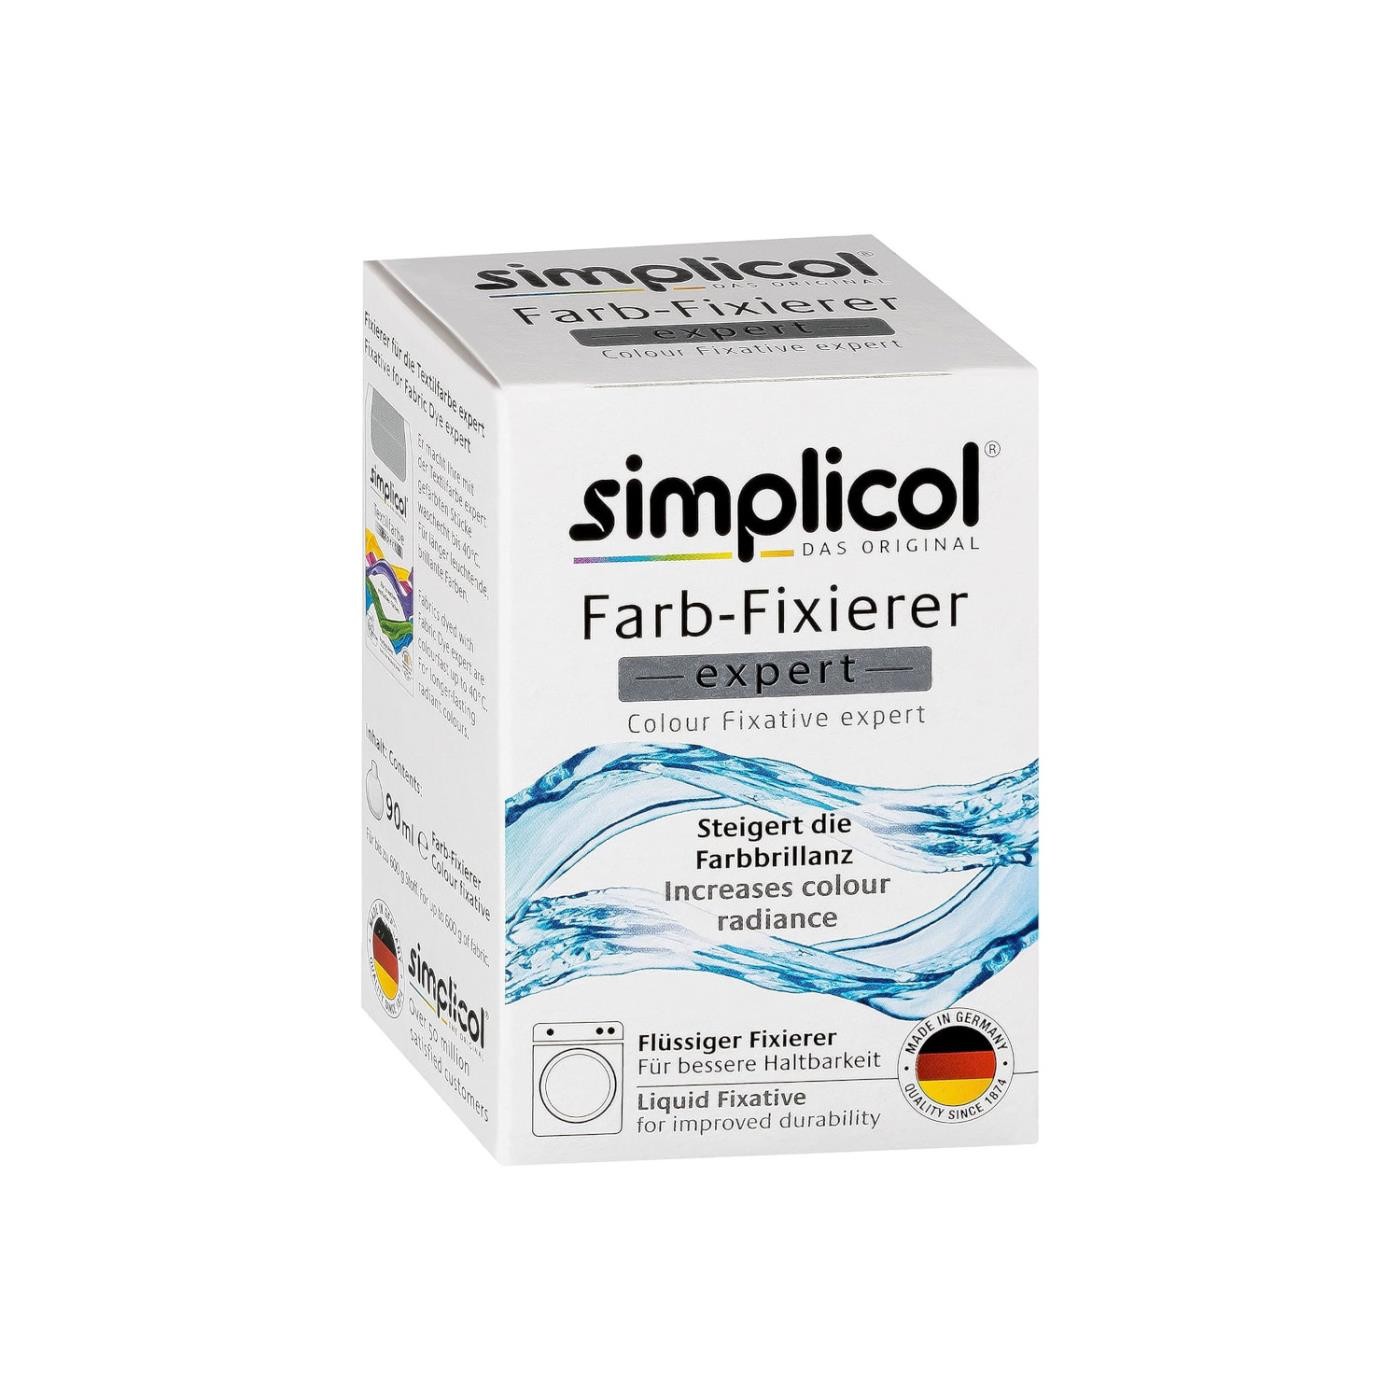 Simplicol Expert Farb- Fixierer 90g